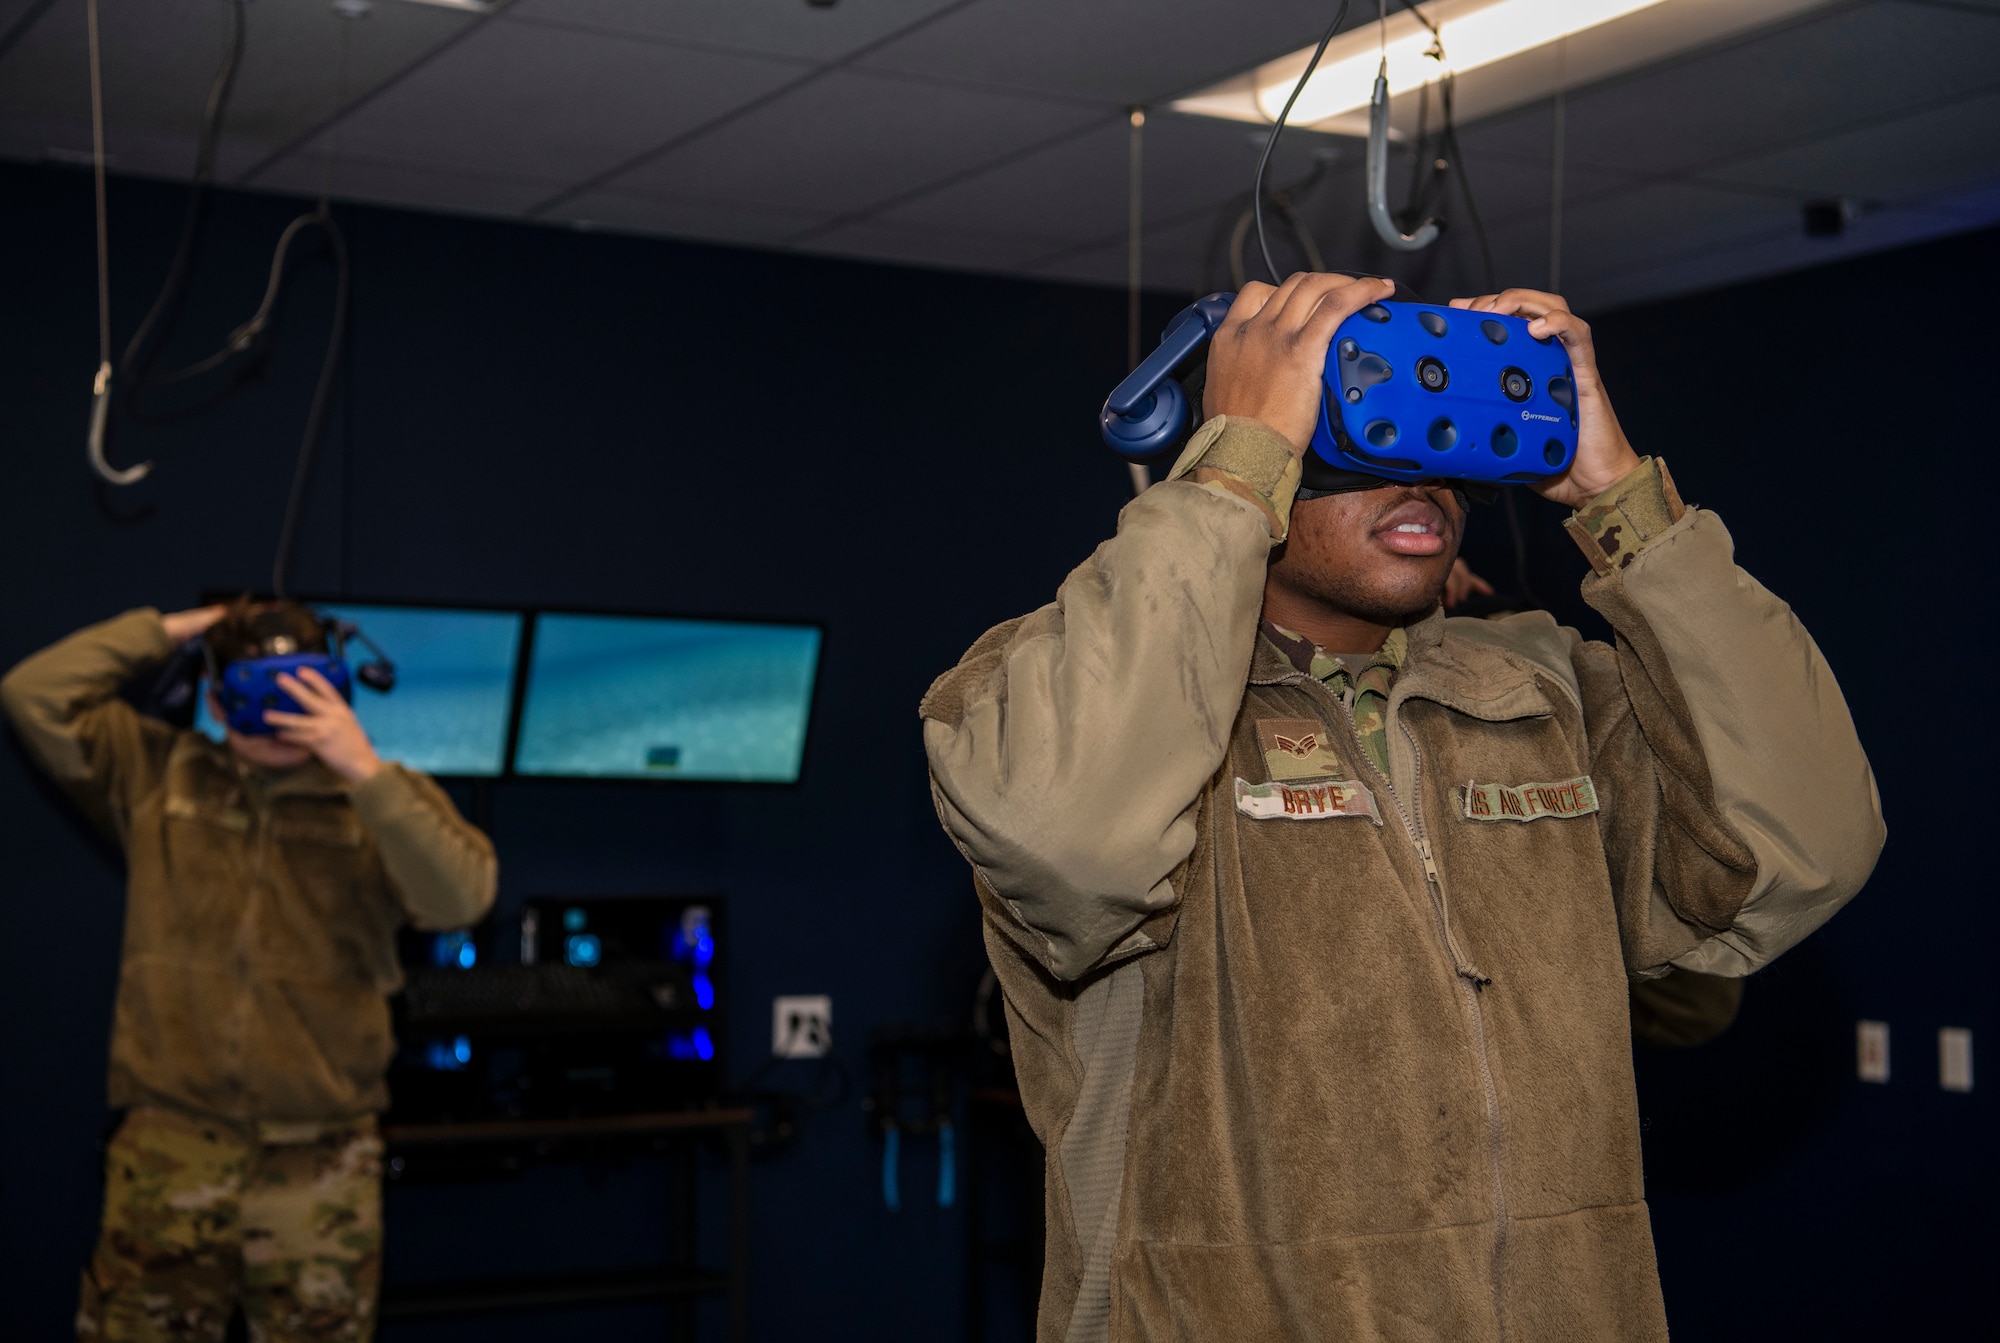 Senior Airman Curtis Brye, 7th Civil Engineering Squadron firefighter driver, right, and Airman 1st Class Andrew Burr, 7th CES firefighter, put on virtual reality headsets in the 317th Maintenance Group’s VR Lab at Dyess Air Force Base, Texas, Jan. 20, 2021.